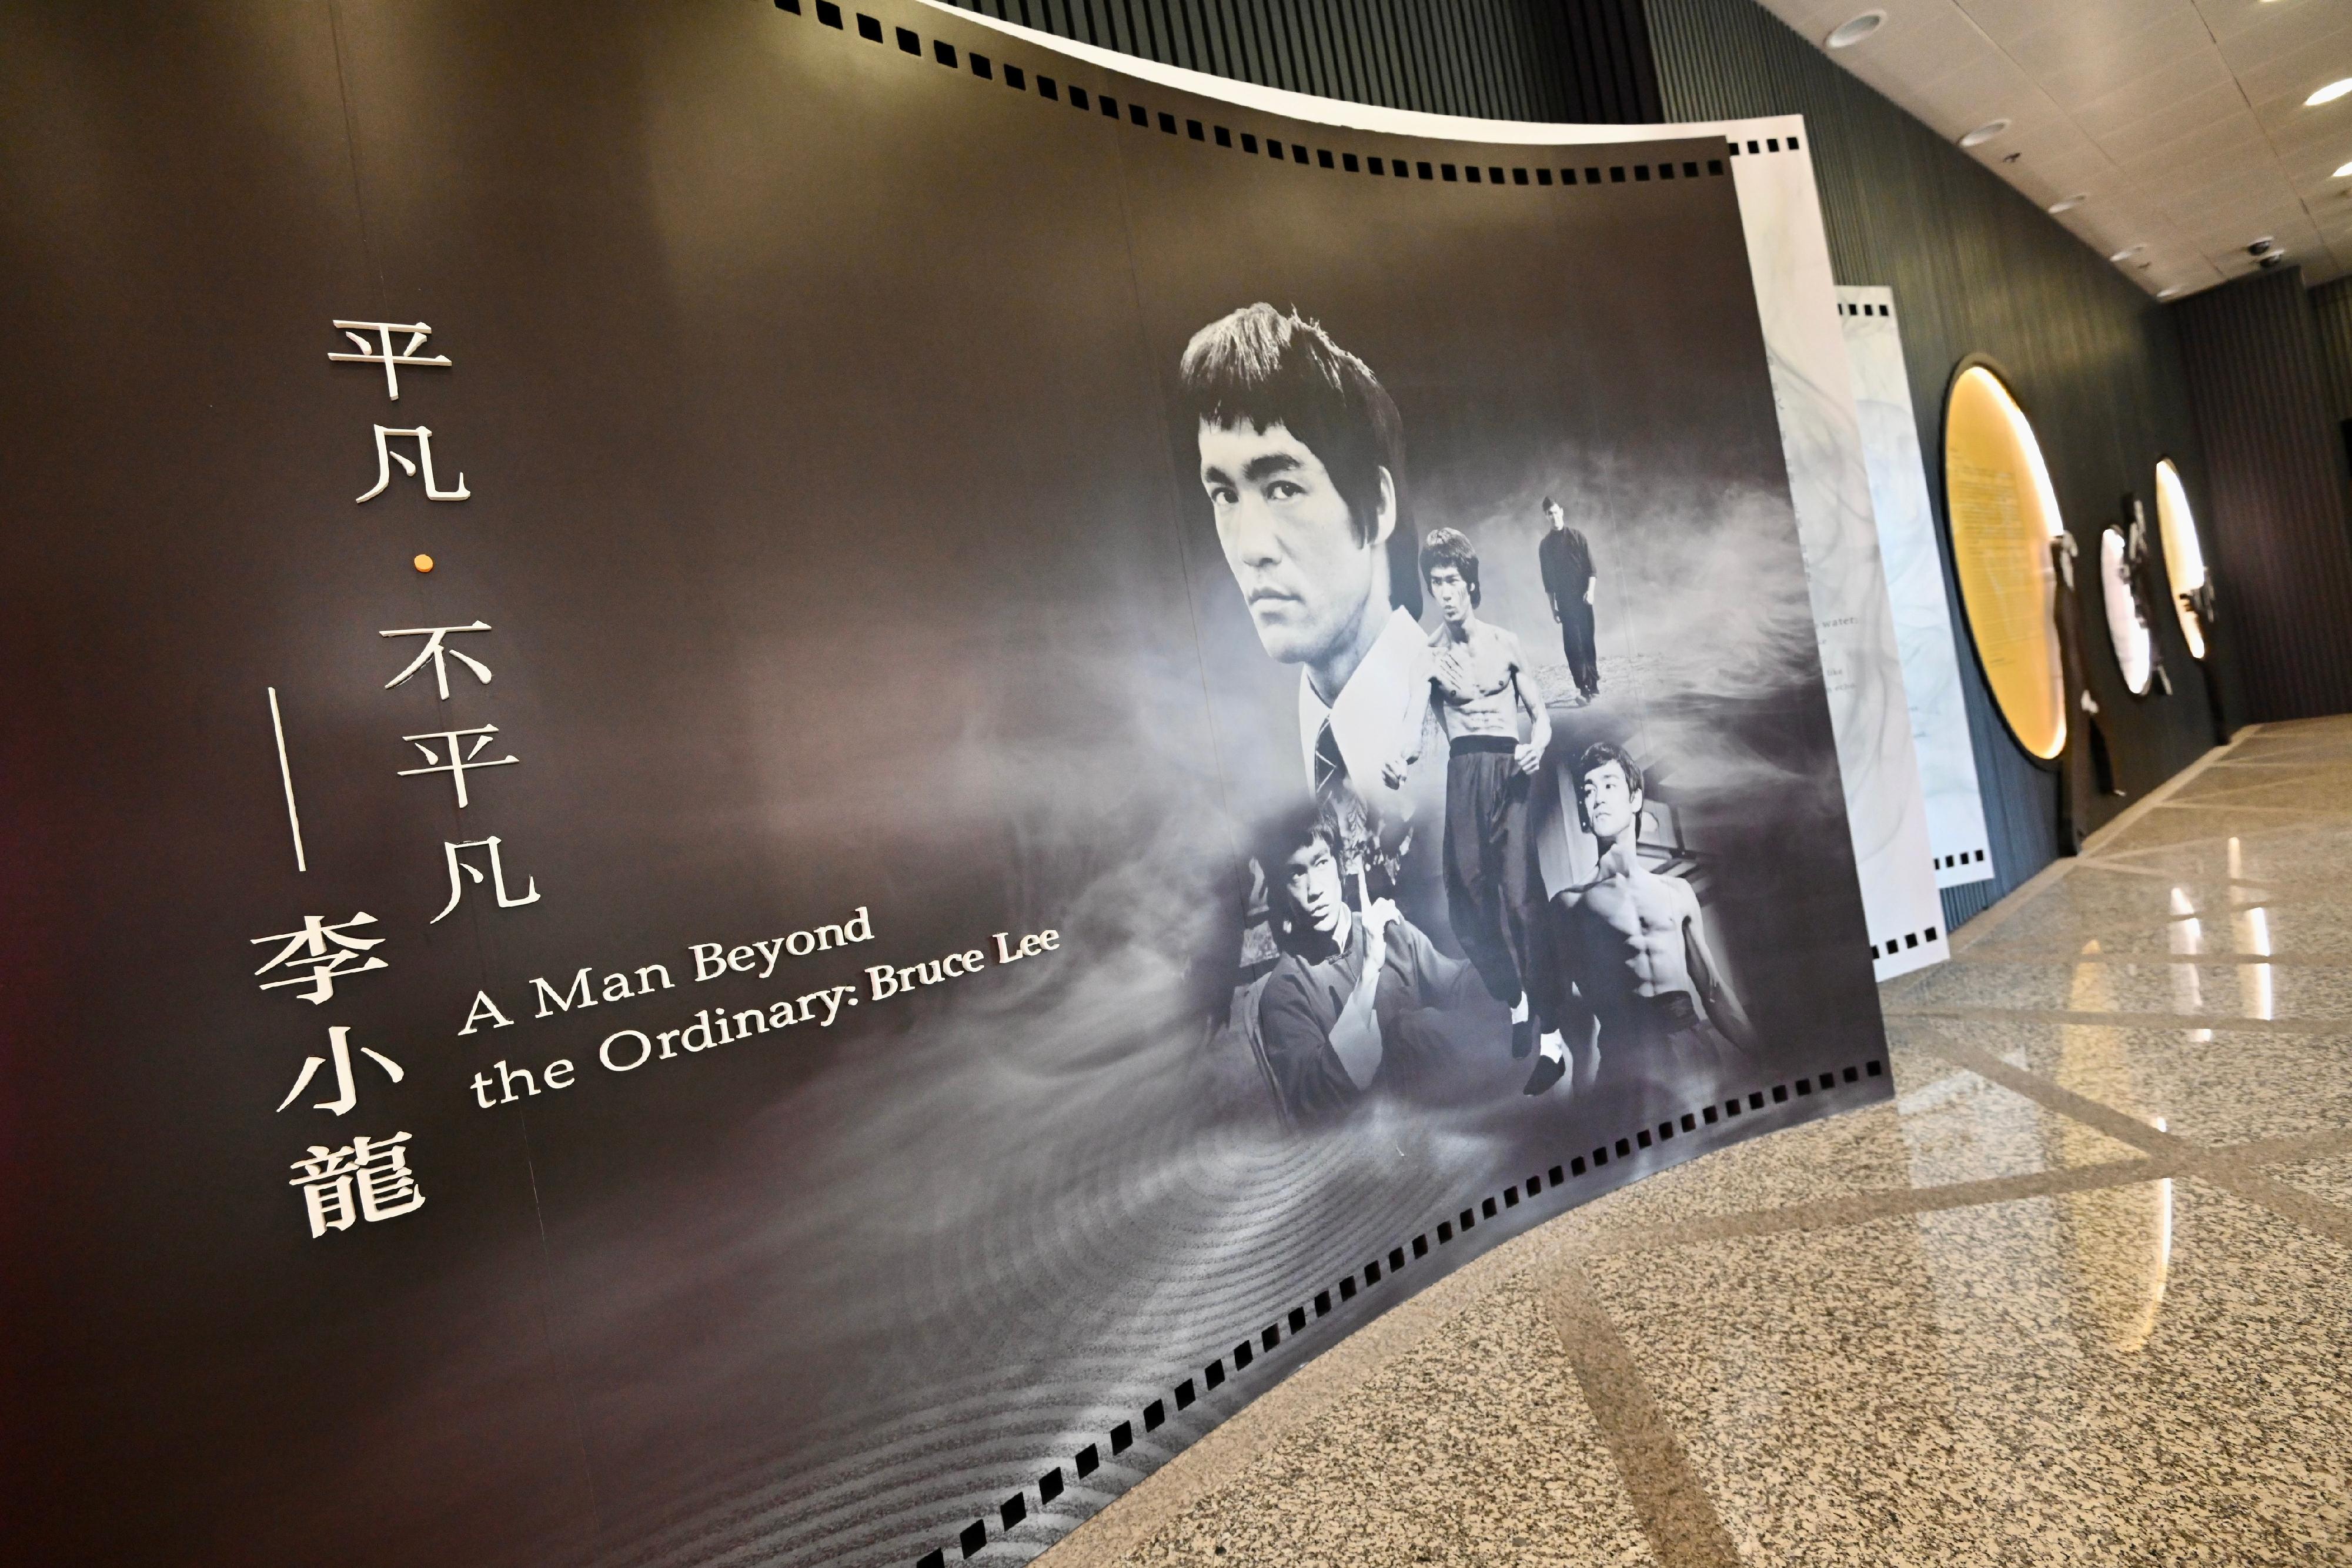 Collaborating with Bruce Lee Foundation, the thematic exhibition "A Man Beyond the Ordinary: Bruce Lee" was launched at the Hong Kong Heritage Museum in 2021. The exhibition features around 400 exhibits including Bruce Lee memorabilia and photos, a large-scale immersive light and sensory installation "Self．Martial Arts．Emptiness" and other interactive programmes. Through his films, martial arts and life philosophy, visitors will be able to revisit the legend of Bruce Lee.